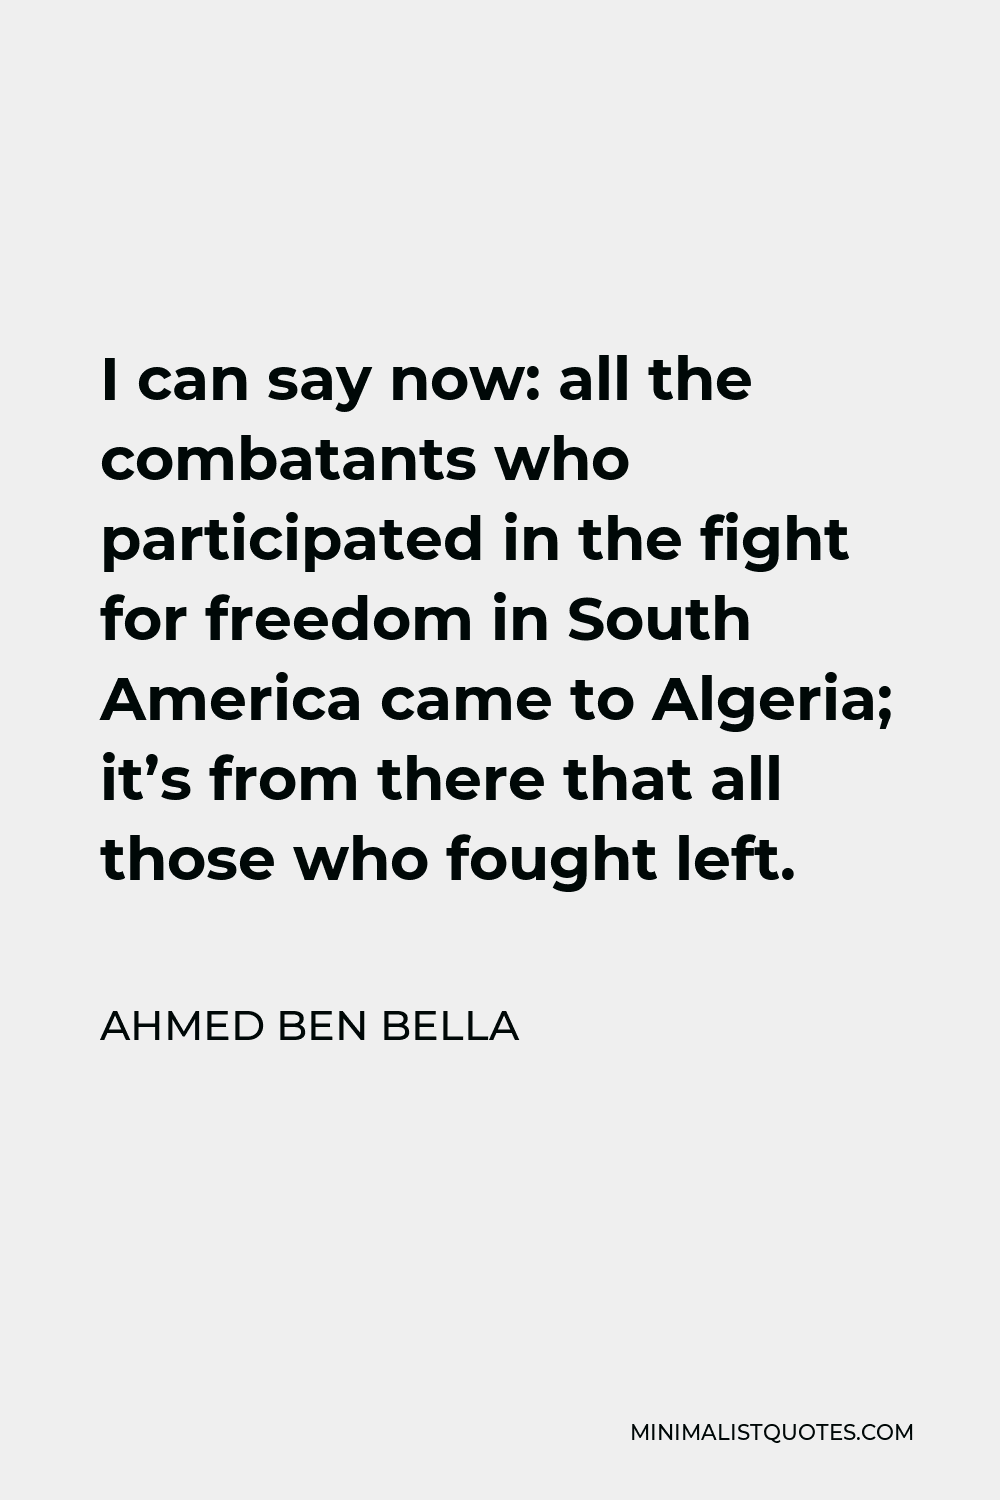 Ahmed Ben Bella Quote - I can say now: all the combatants who participated in the fight for freedom in South America came to Algeria; it’s from there that all those who fought left.